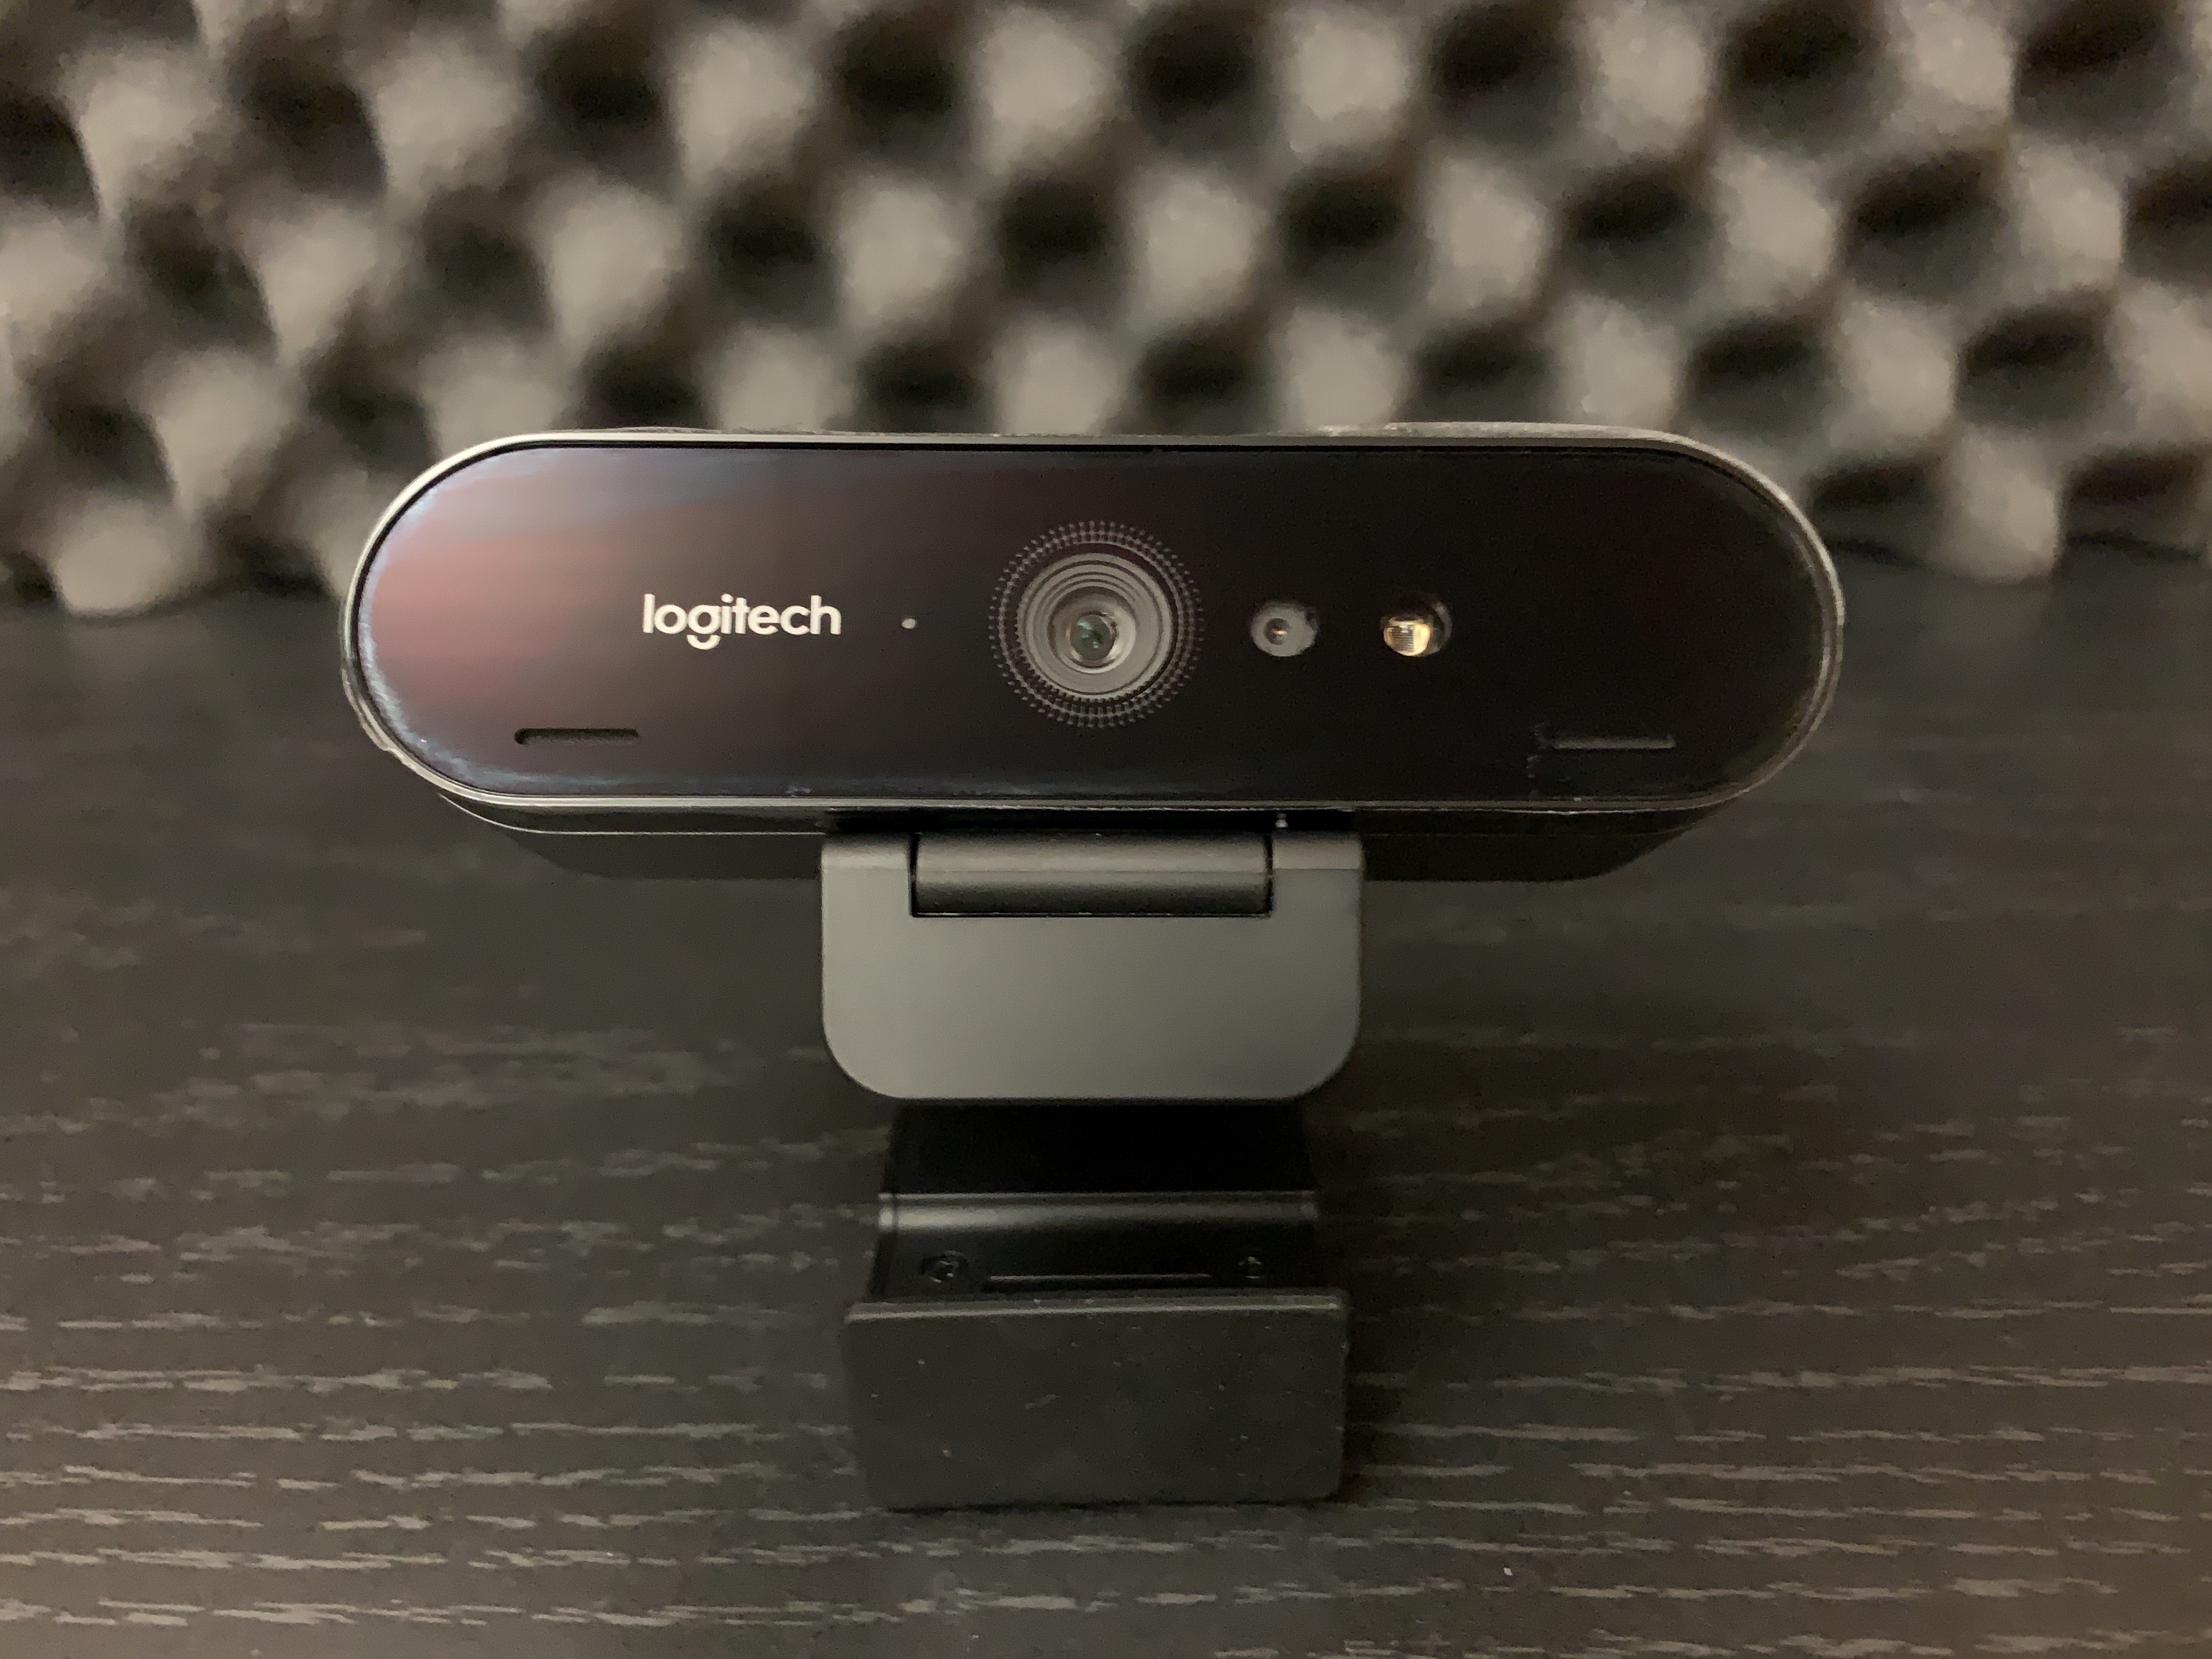 Milliard coping tjenestemænd 3 Tips to Improve Your Logitech C920 and Logitech BRIO Image Quality – In  Third Person